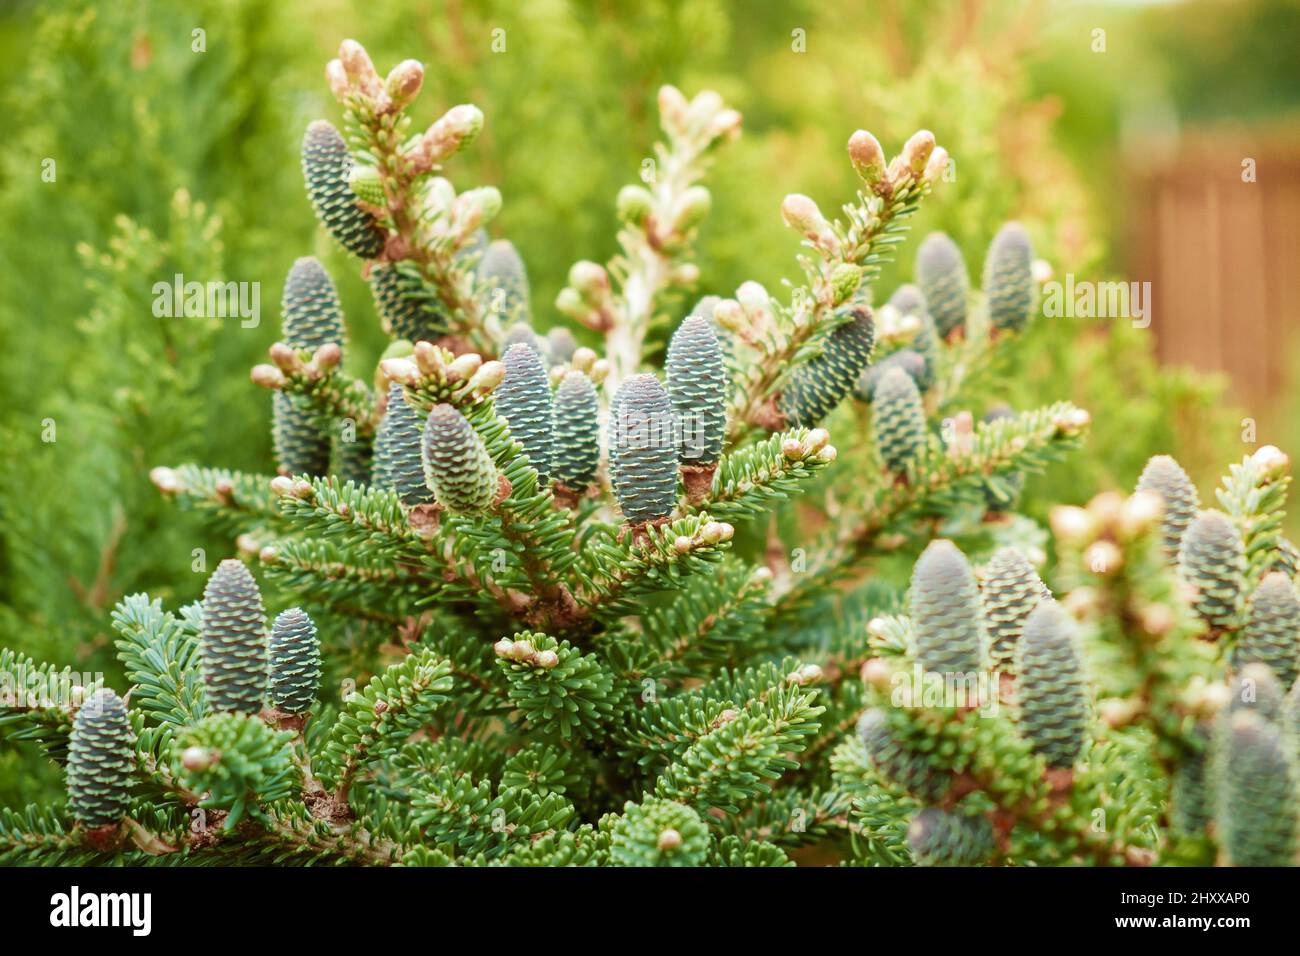 Lot of cones on branches of korean fir. Abies koreana in garden in golden light at summer day. Stock Photo